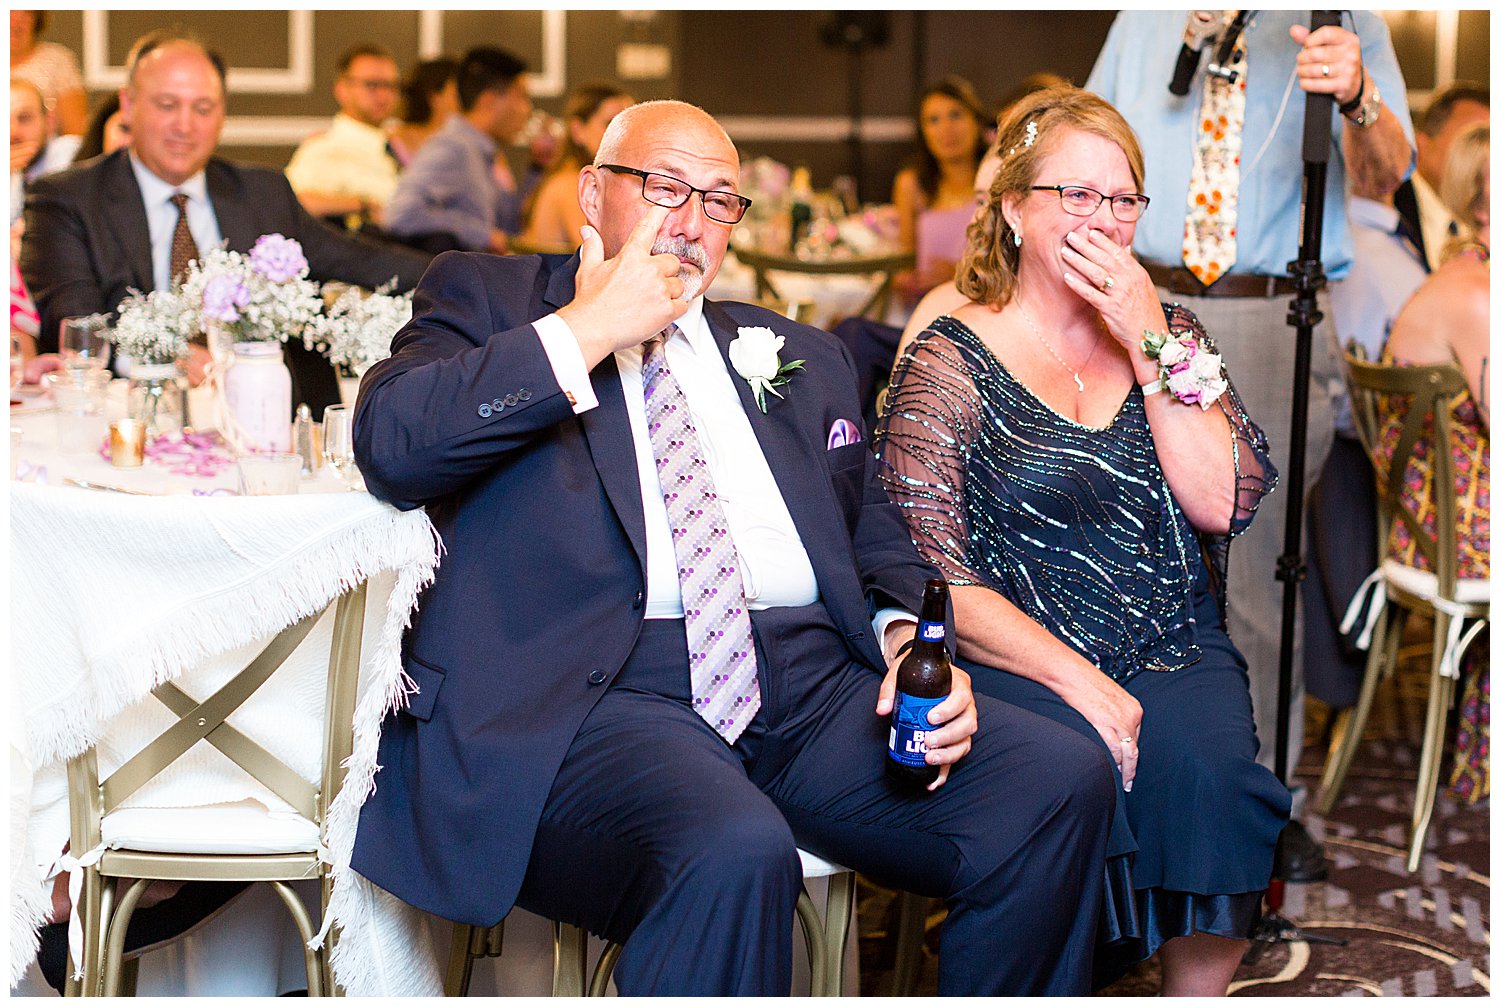 Groom's parents crying during speeches